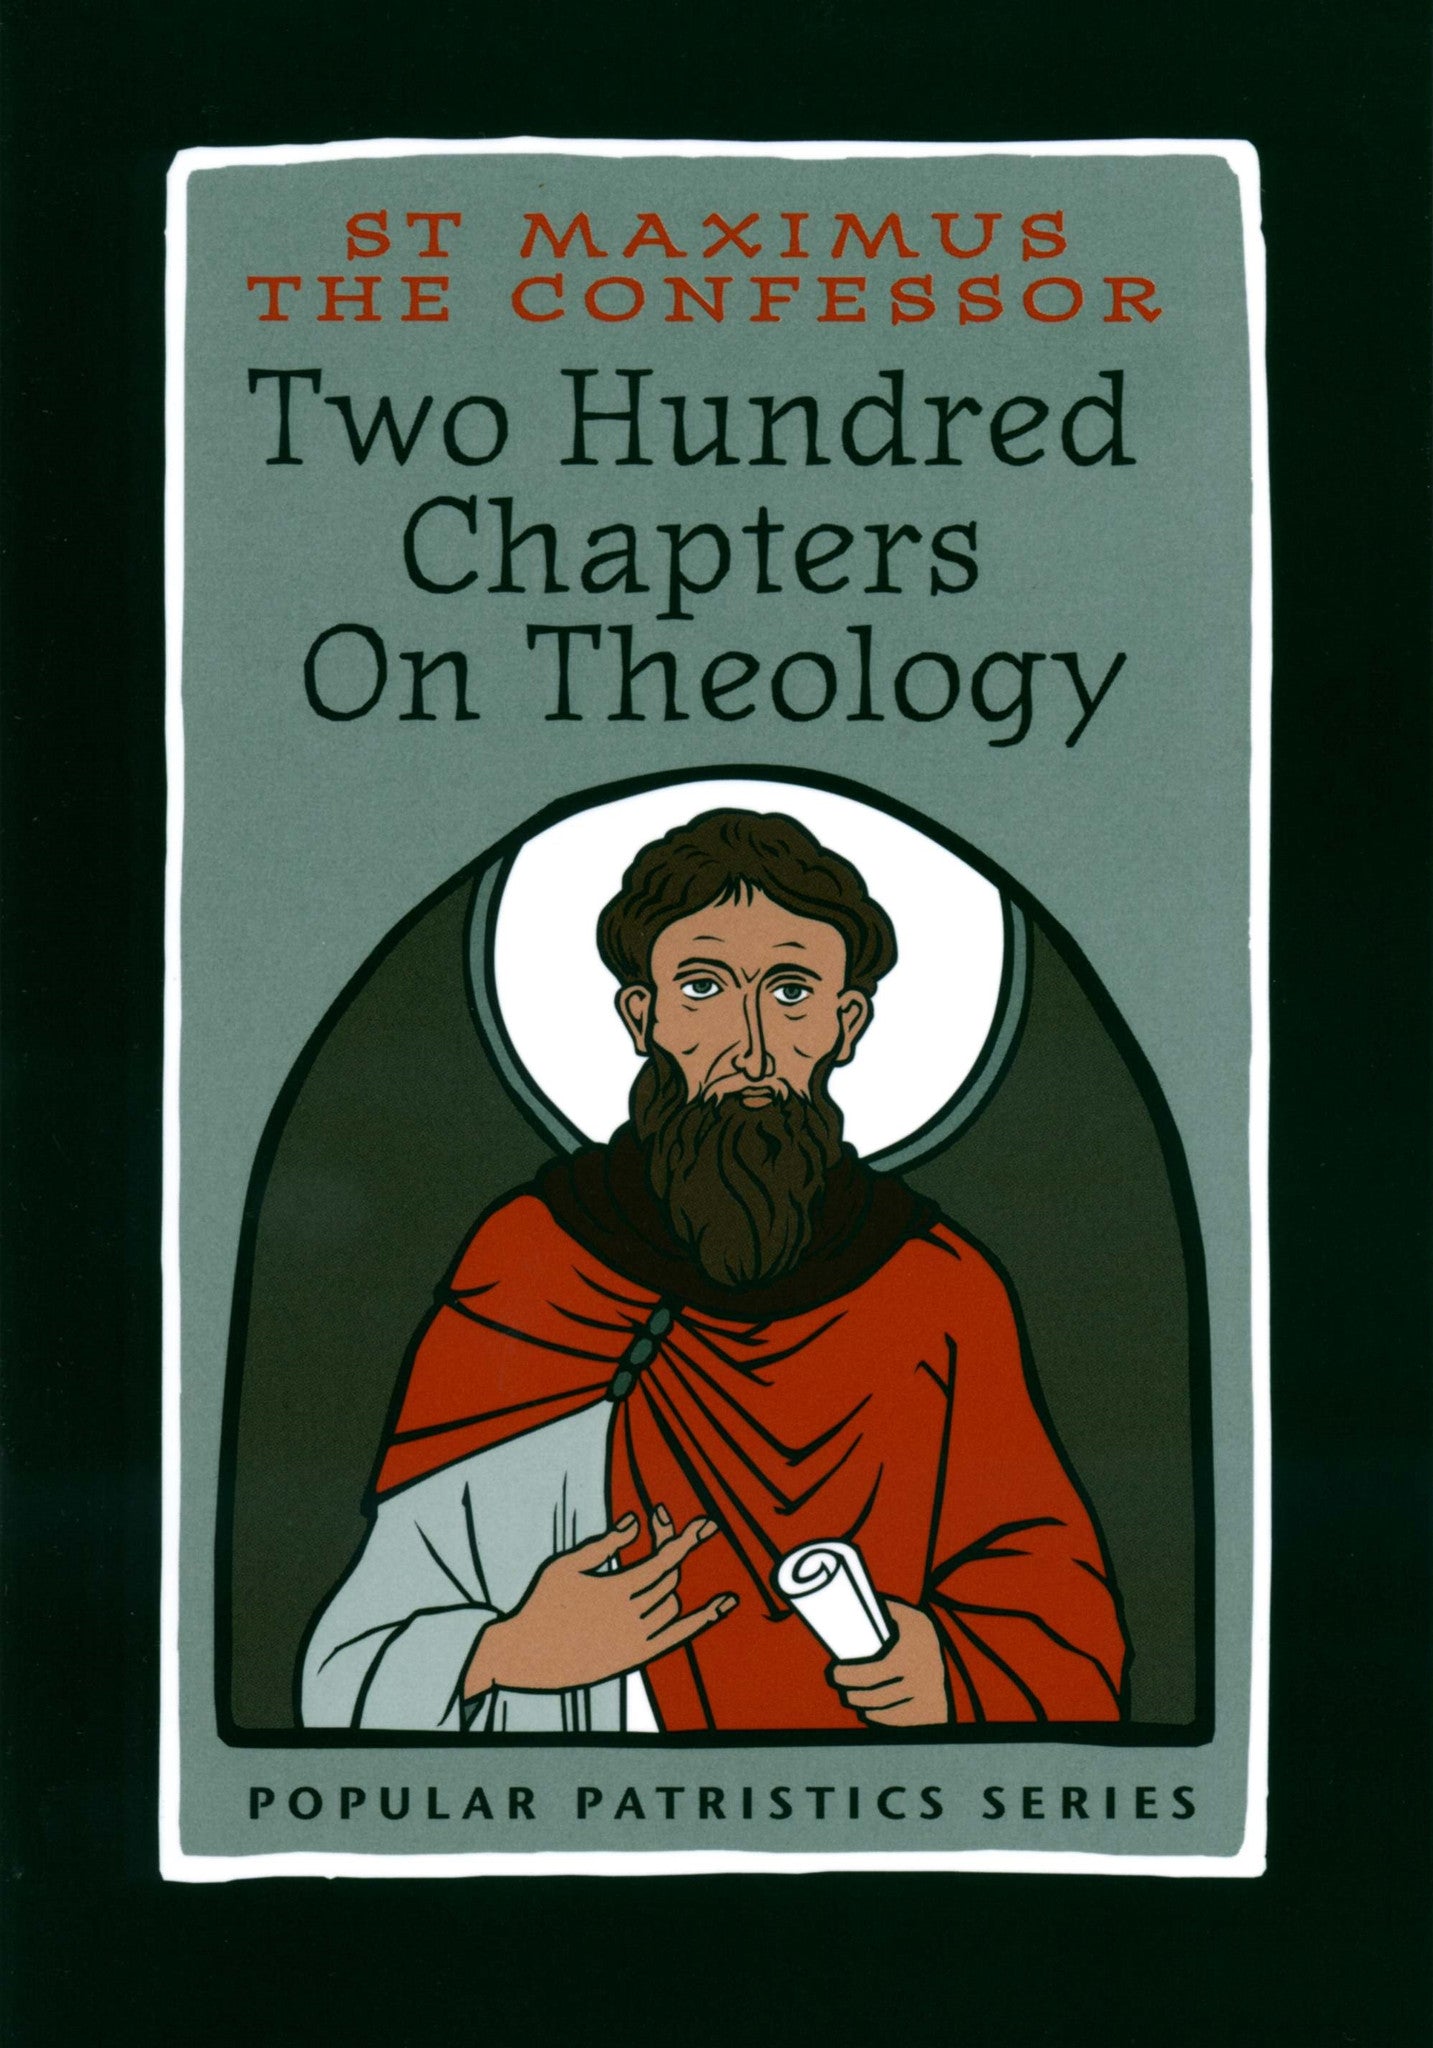 St. Maximus the Confessor: Two Hundred Chapters on Theology